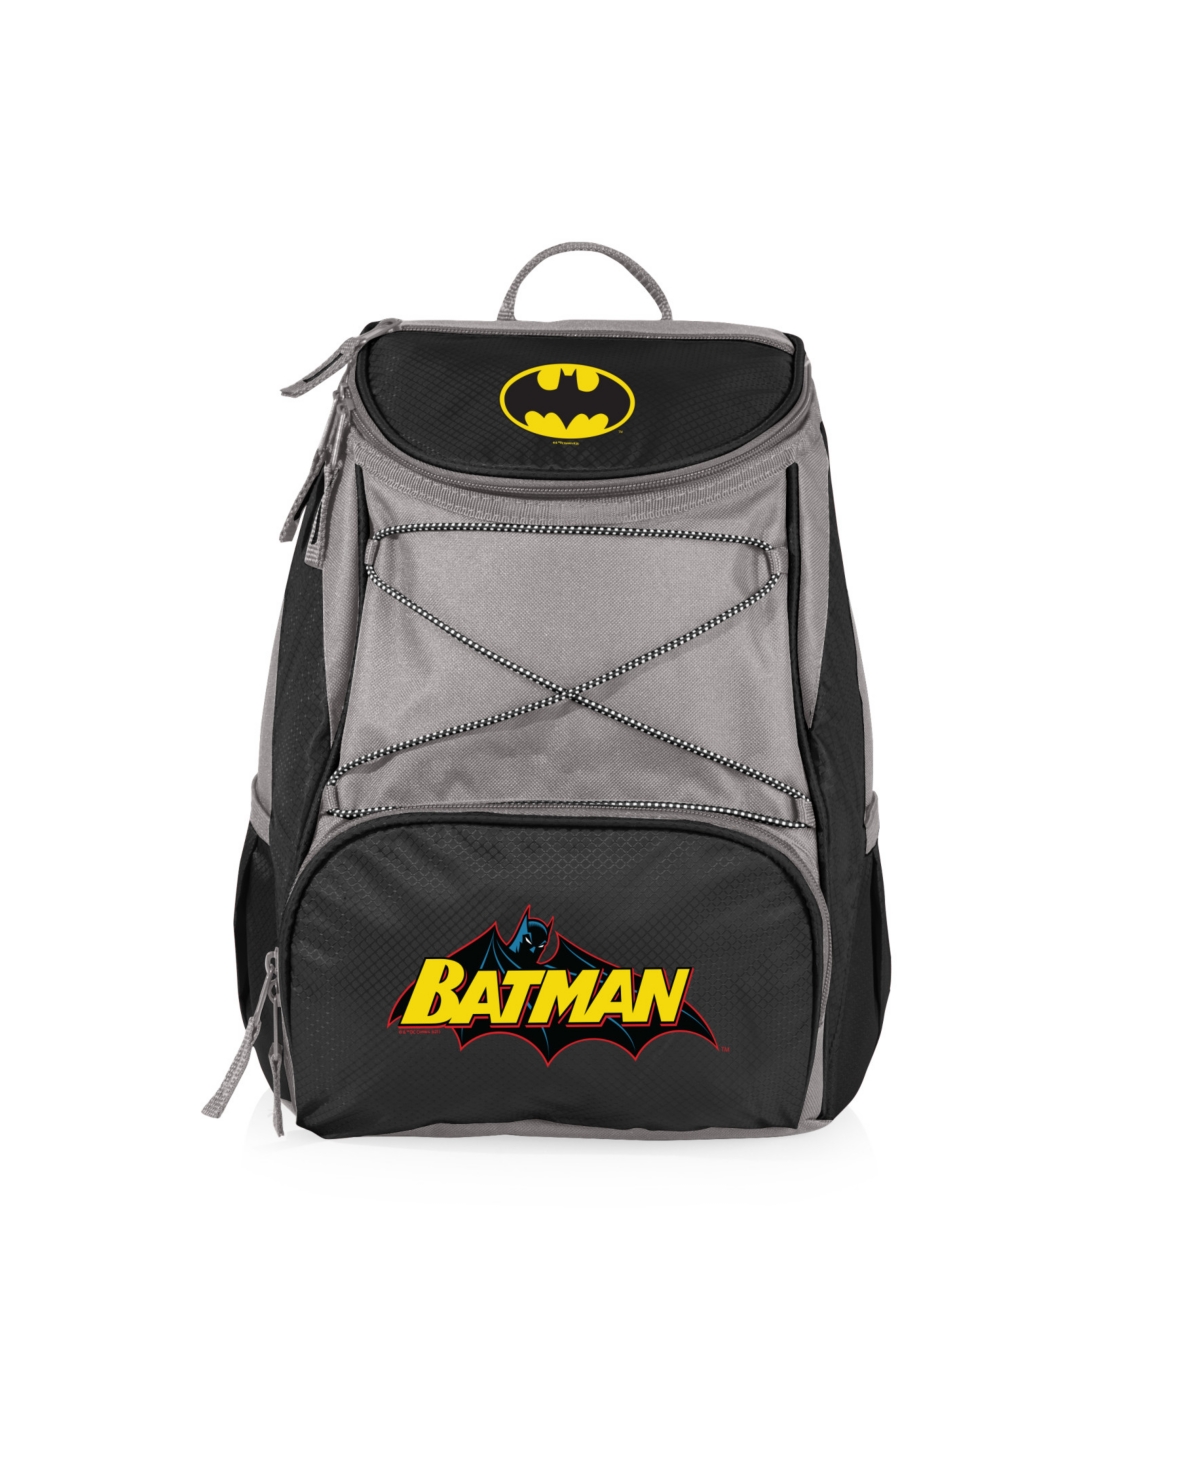 Oniva Batman Ptx Cooler Backpack In Black With Gray Accents